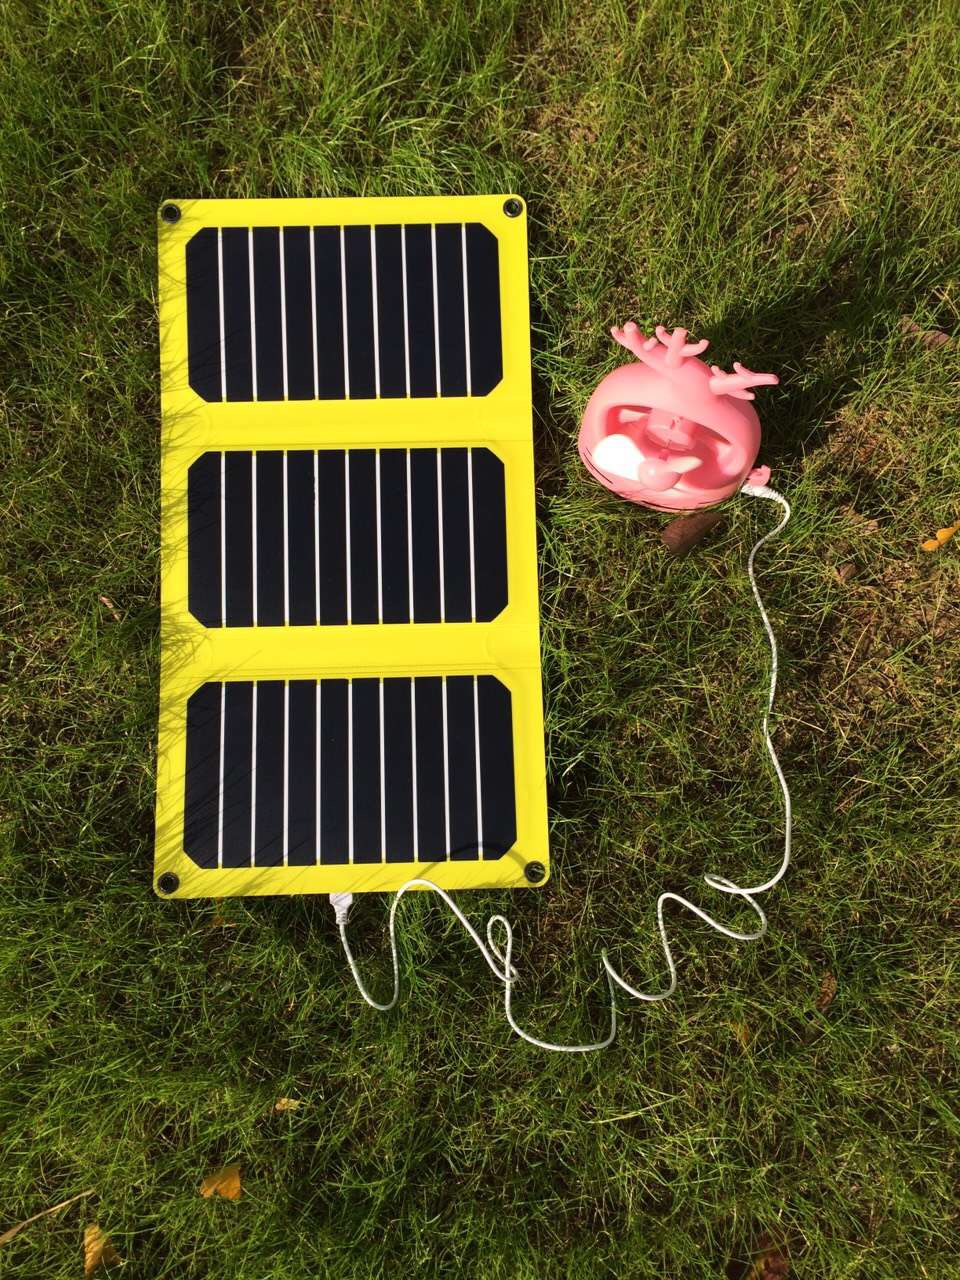 CLPSC-1604 PORTABLE SOLAR CHARGER